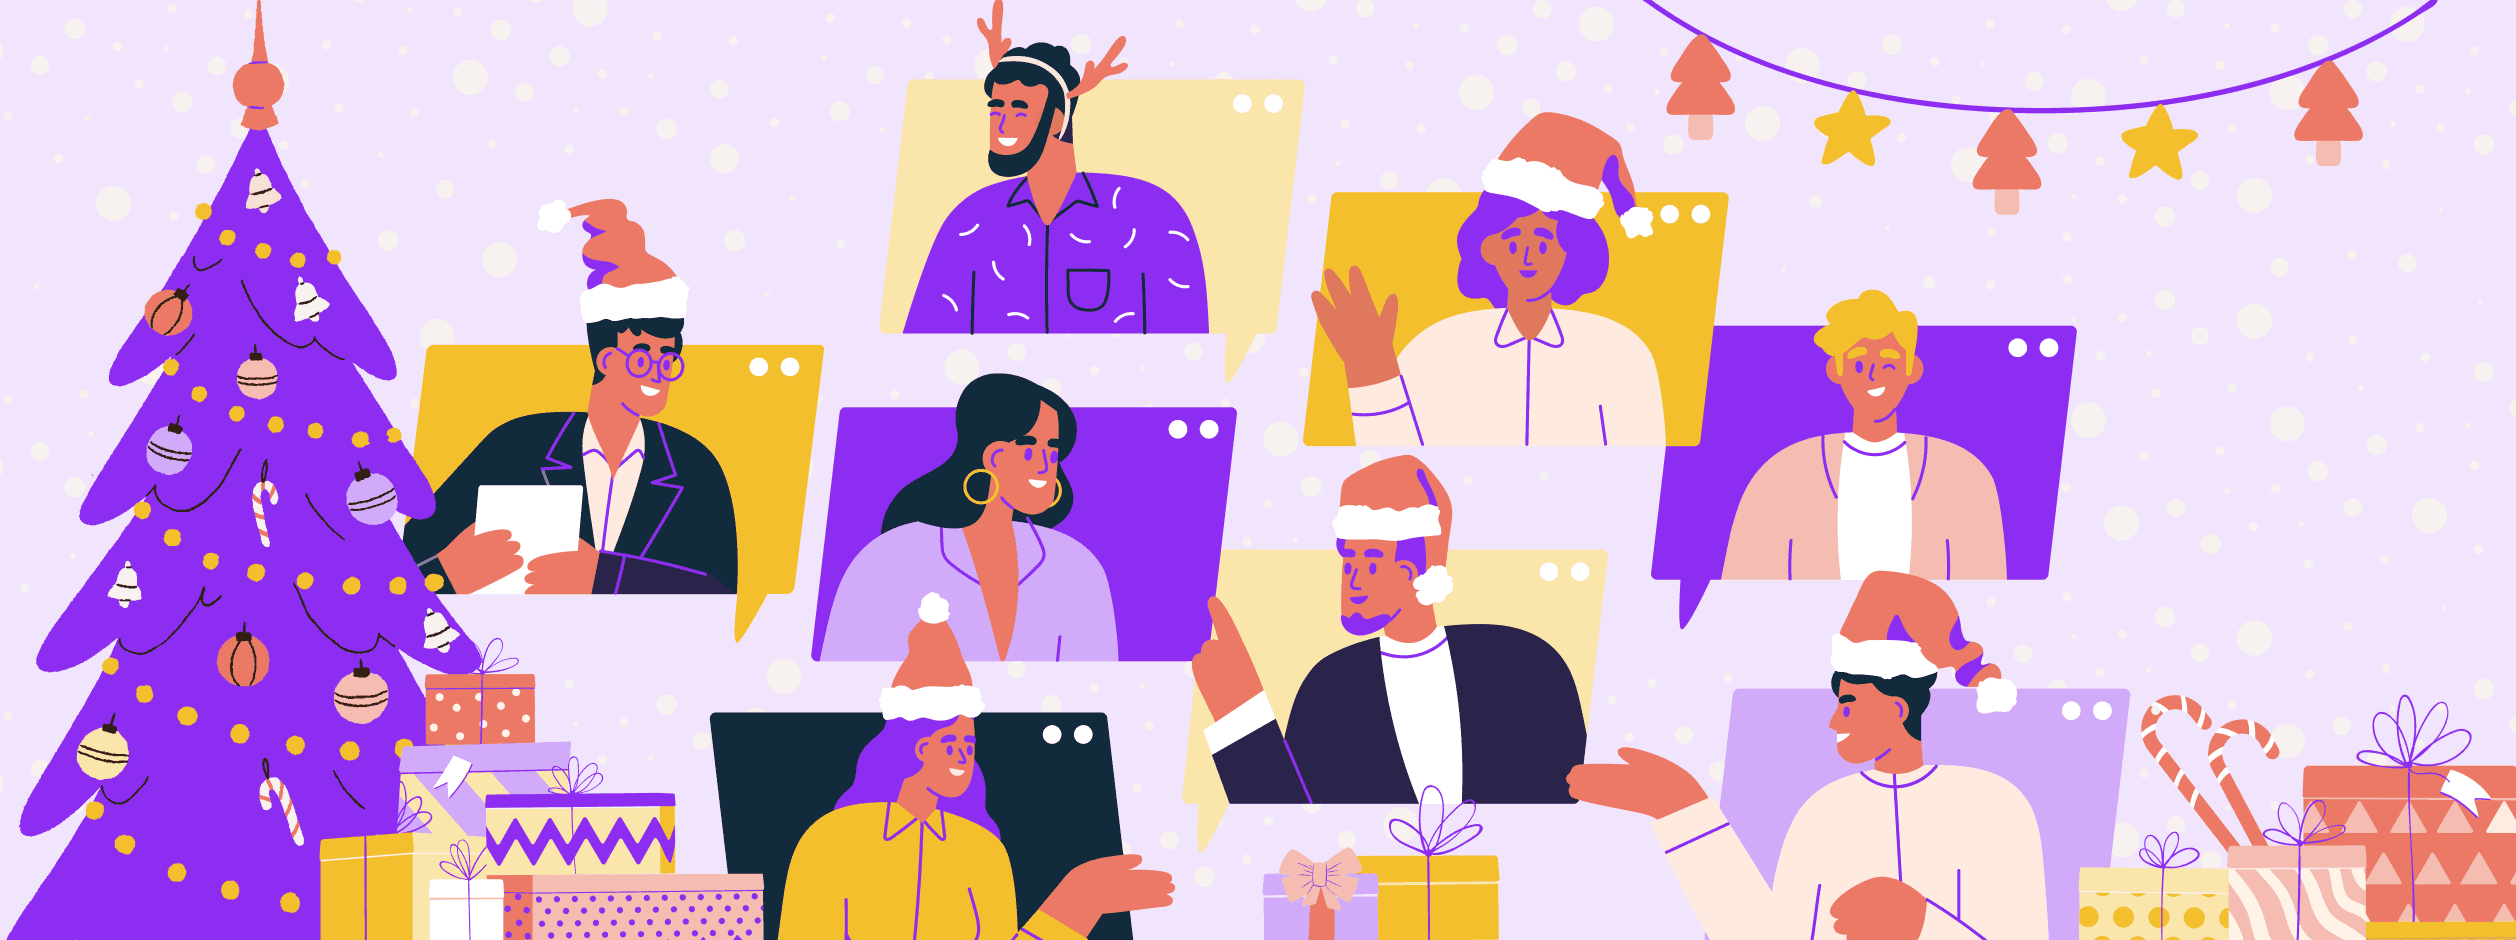 16 Virtual Holiday Party Ideas for Your Remote Team